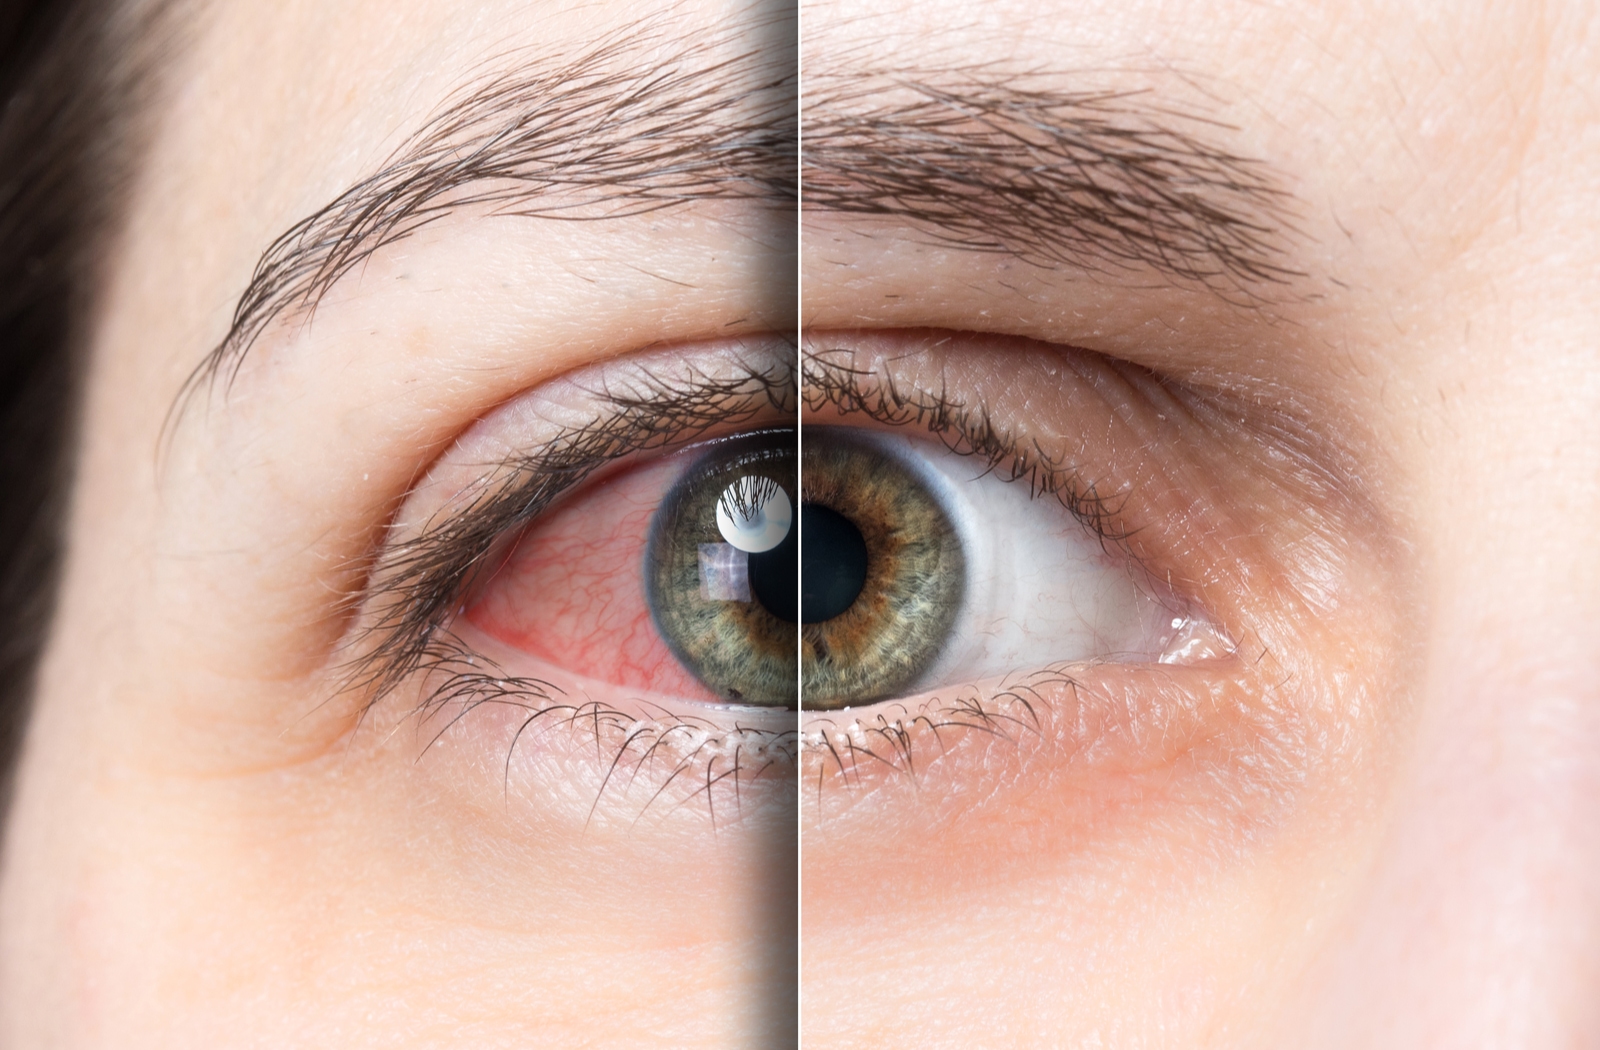 Can Intense Pulsed Light Therapy Treat Dry Eye?